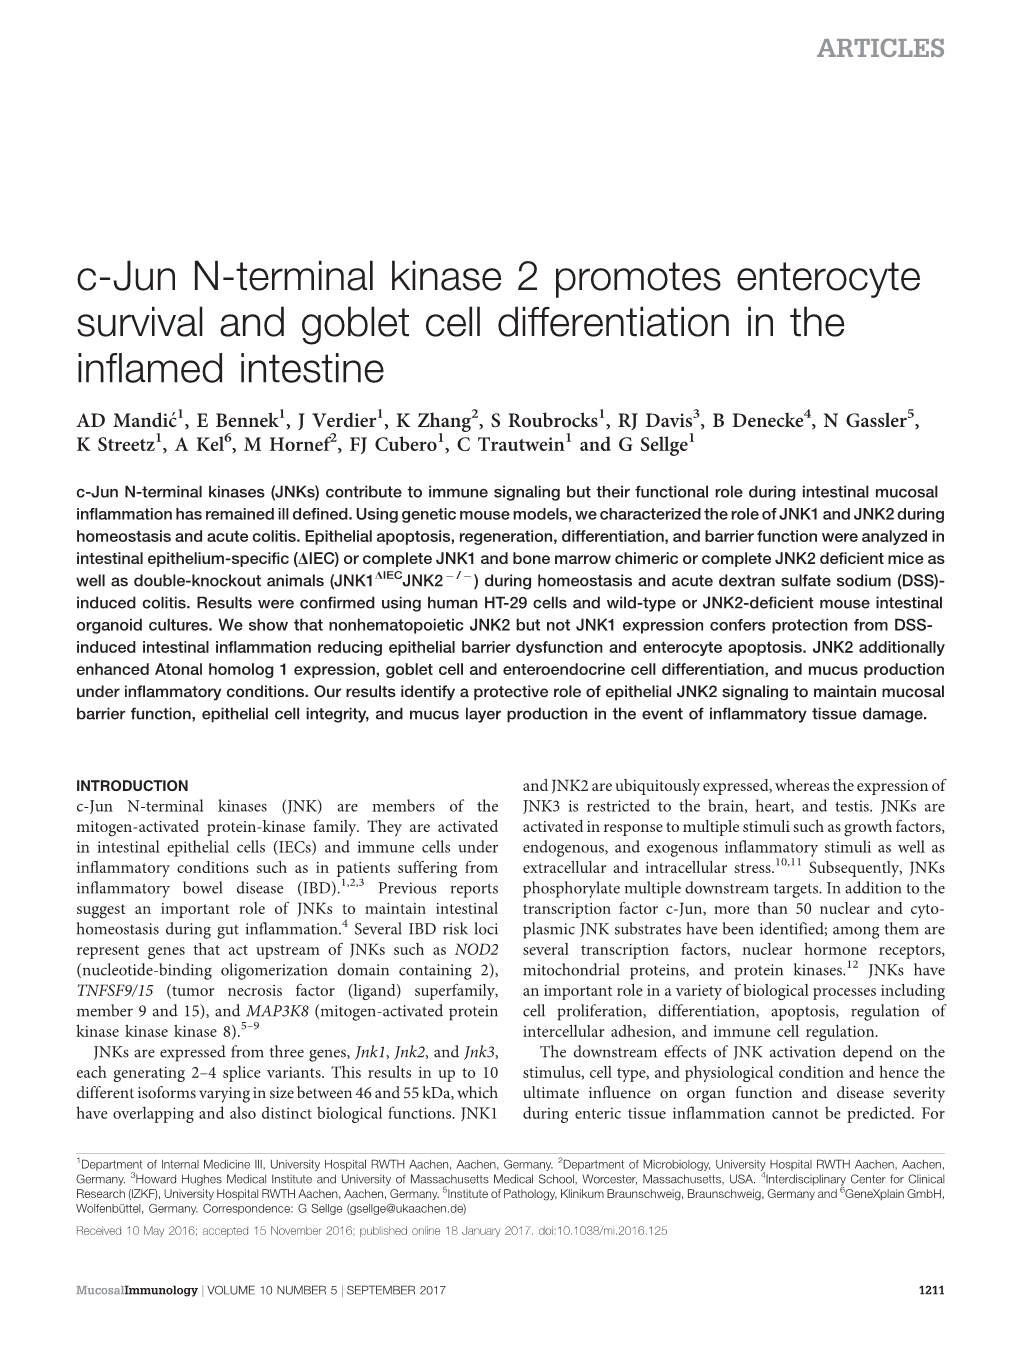 C-Jun N-Terminal Kinase 2 Promotes Enterocyte Survival and Goblet Cell Differentiation in the Inflamed Intestine